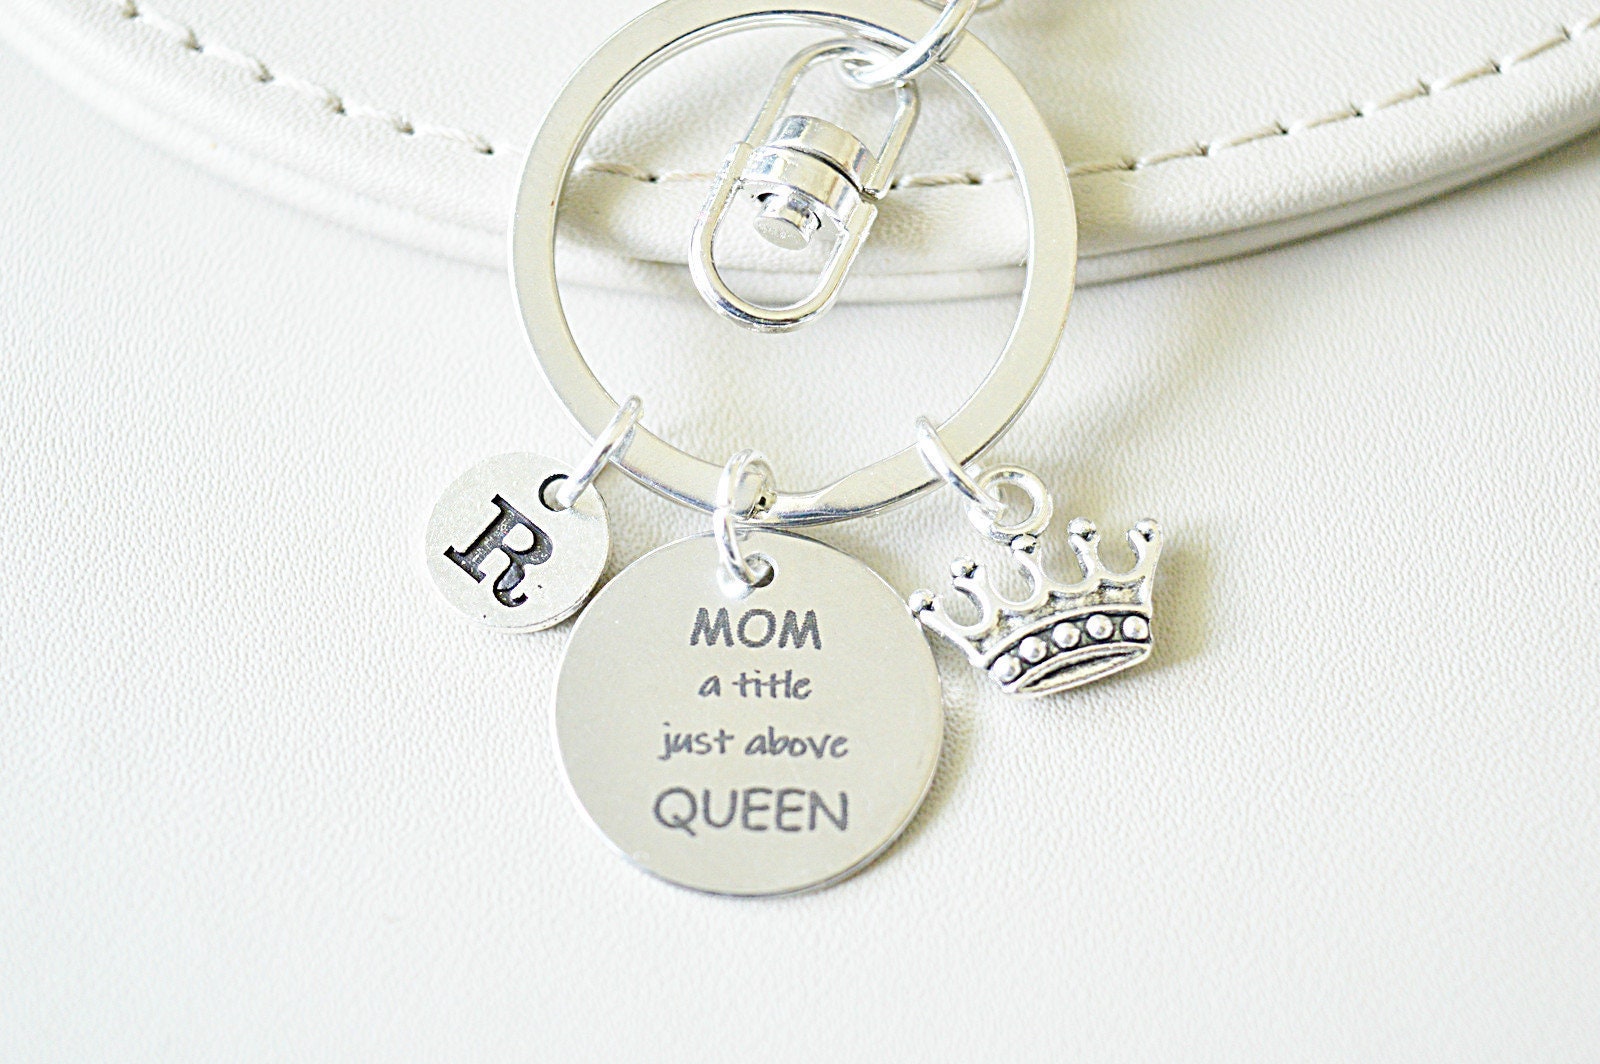 Mom Birthday Gift, Gift From Daughter, Mom Gift Wedding, Mom Keyring, Mom Keychain, Mom a Title Just Above Queen, Mom Memorial, Personalised